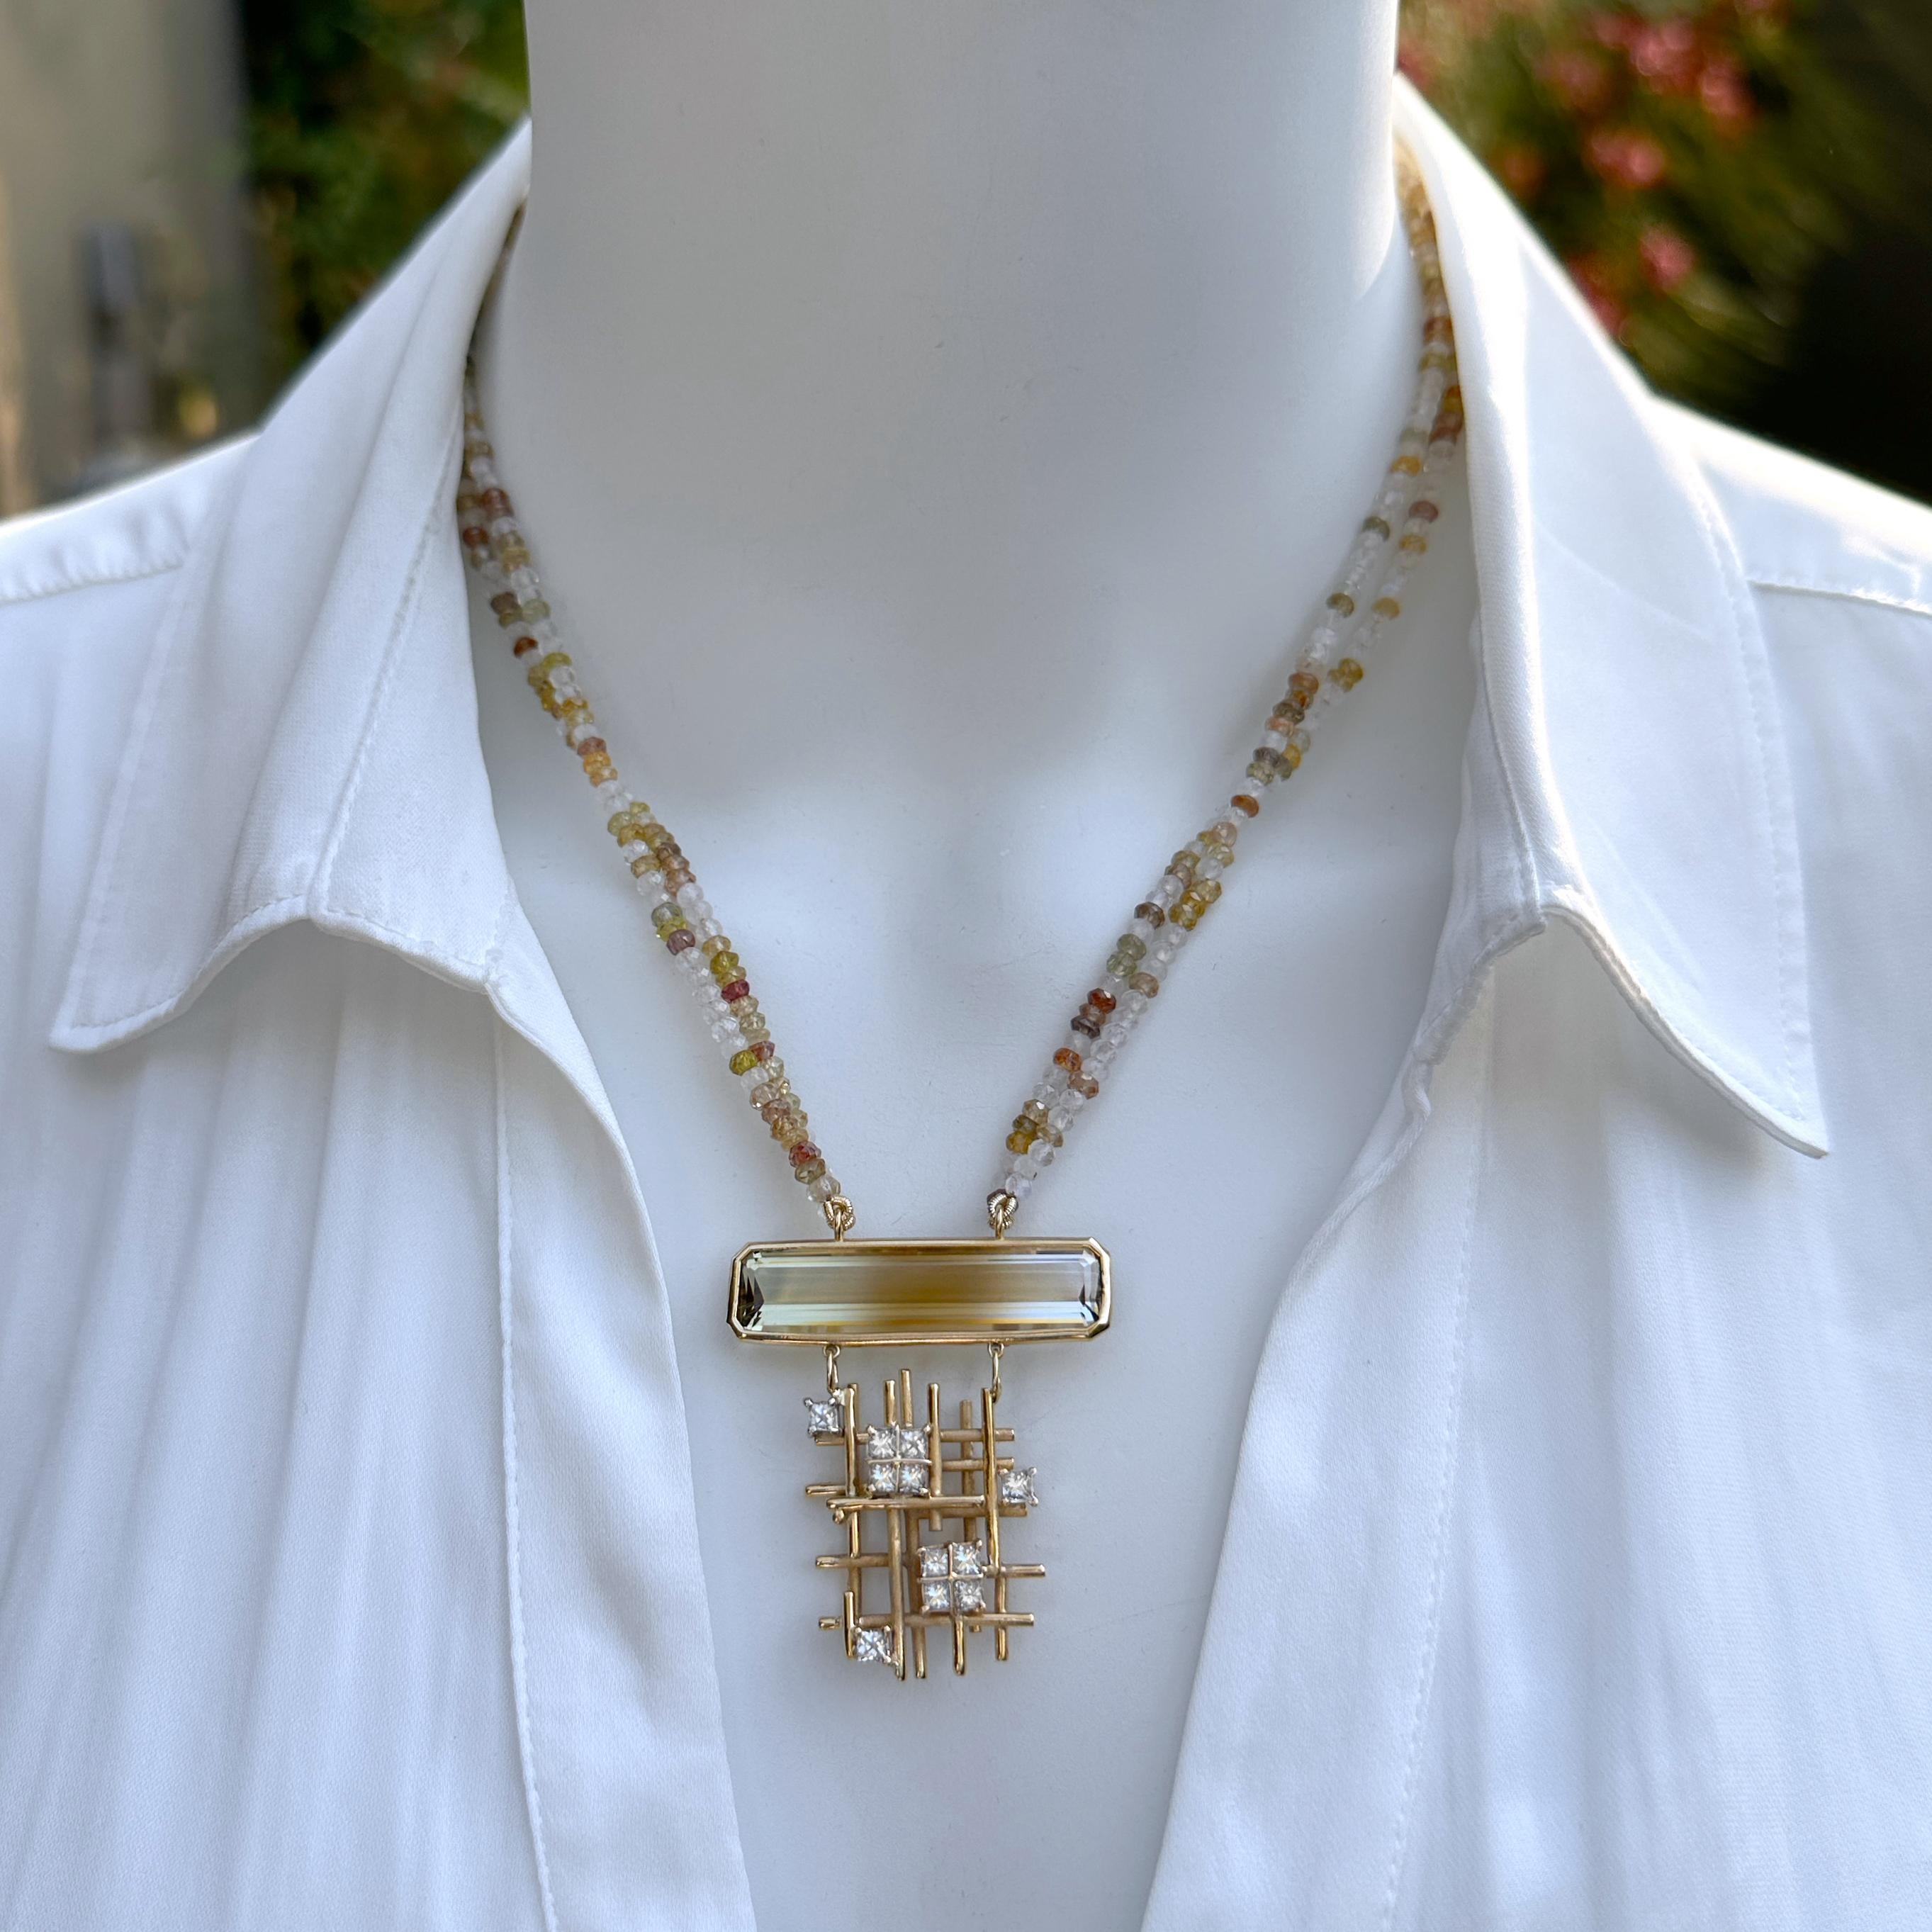 This one-of-a-kind humdinger by Eytan Brandes features an 18 karat gold grid set with princess-cut white diamonds suspended from a  long natural citrine boasting a gorgeous color transition from yellow, to smoky gold to crystal clarity.  The